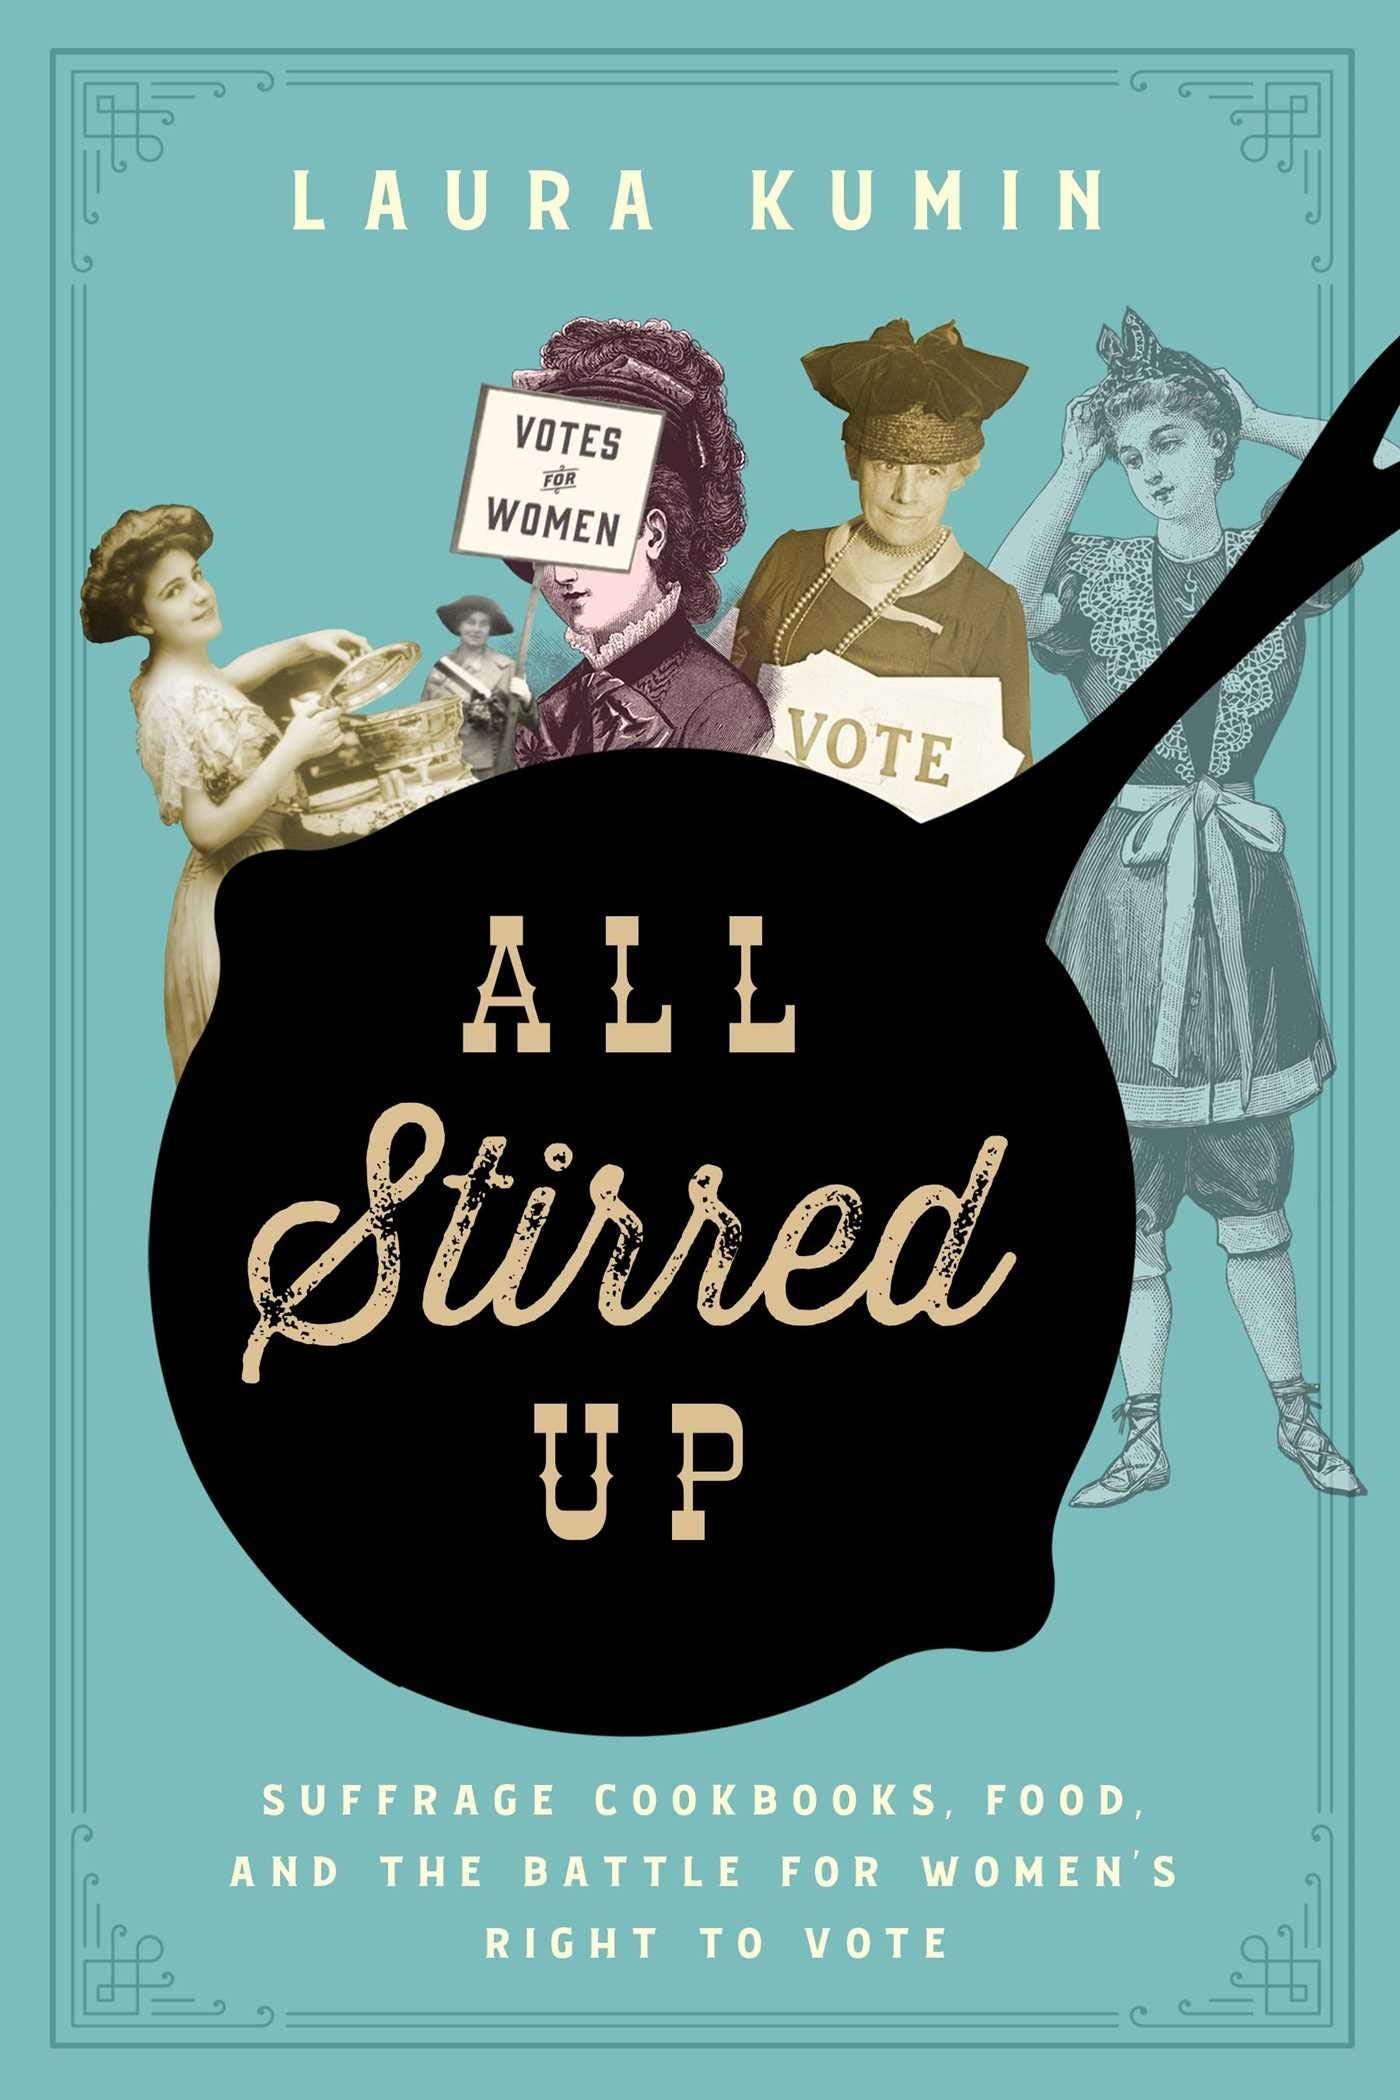 All Stirred Up: Suffrage Cookbooks, Food, and the Battle for Women's Right to Vote (Laura Kumin)